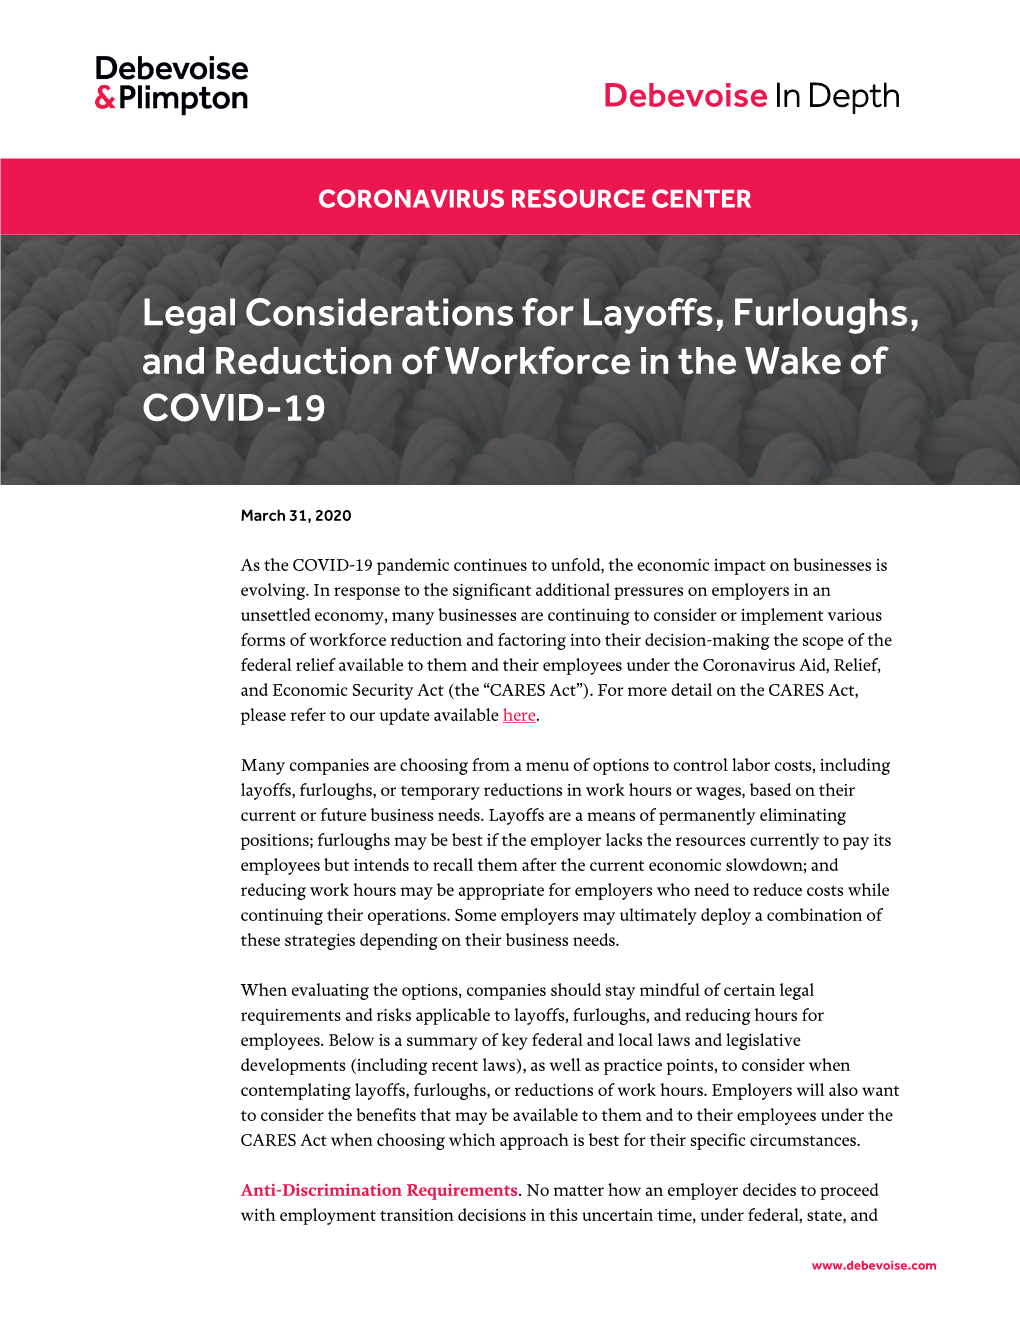 Legal Considerations for Layoffs, Furloughs, and Reduction of Workforce in the Wake of COVID-19